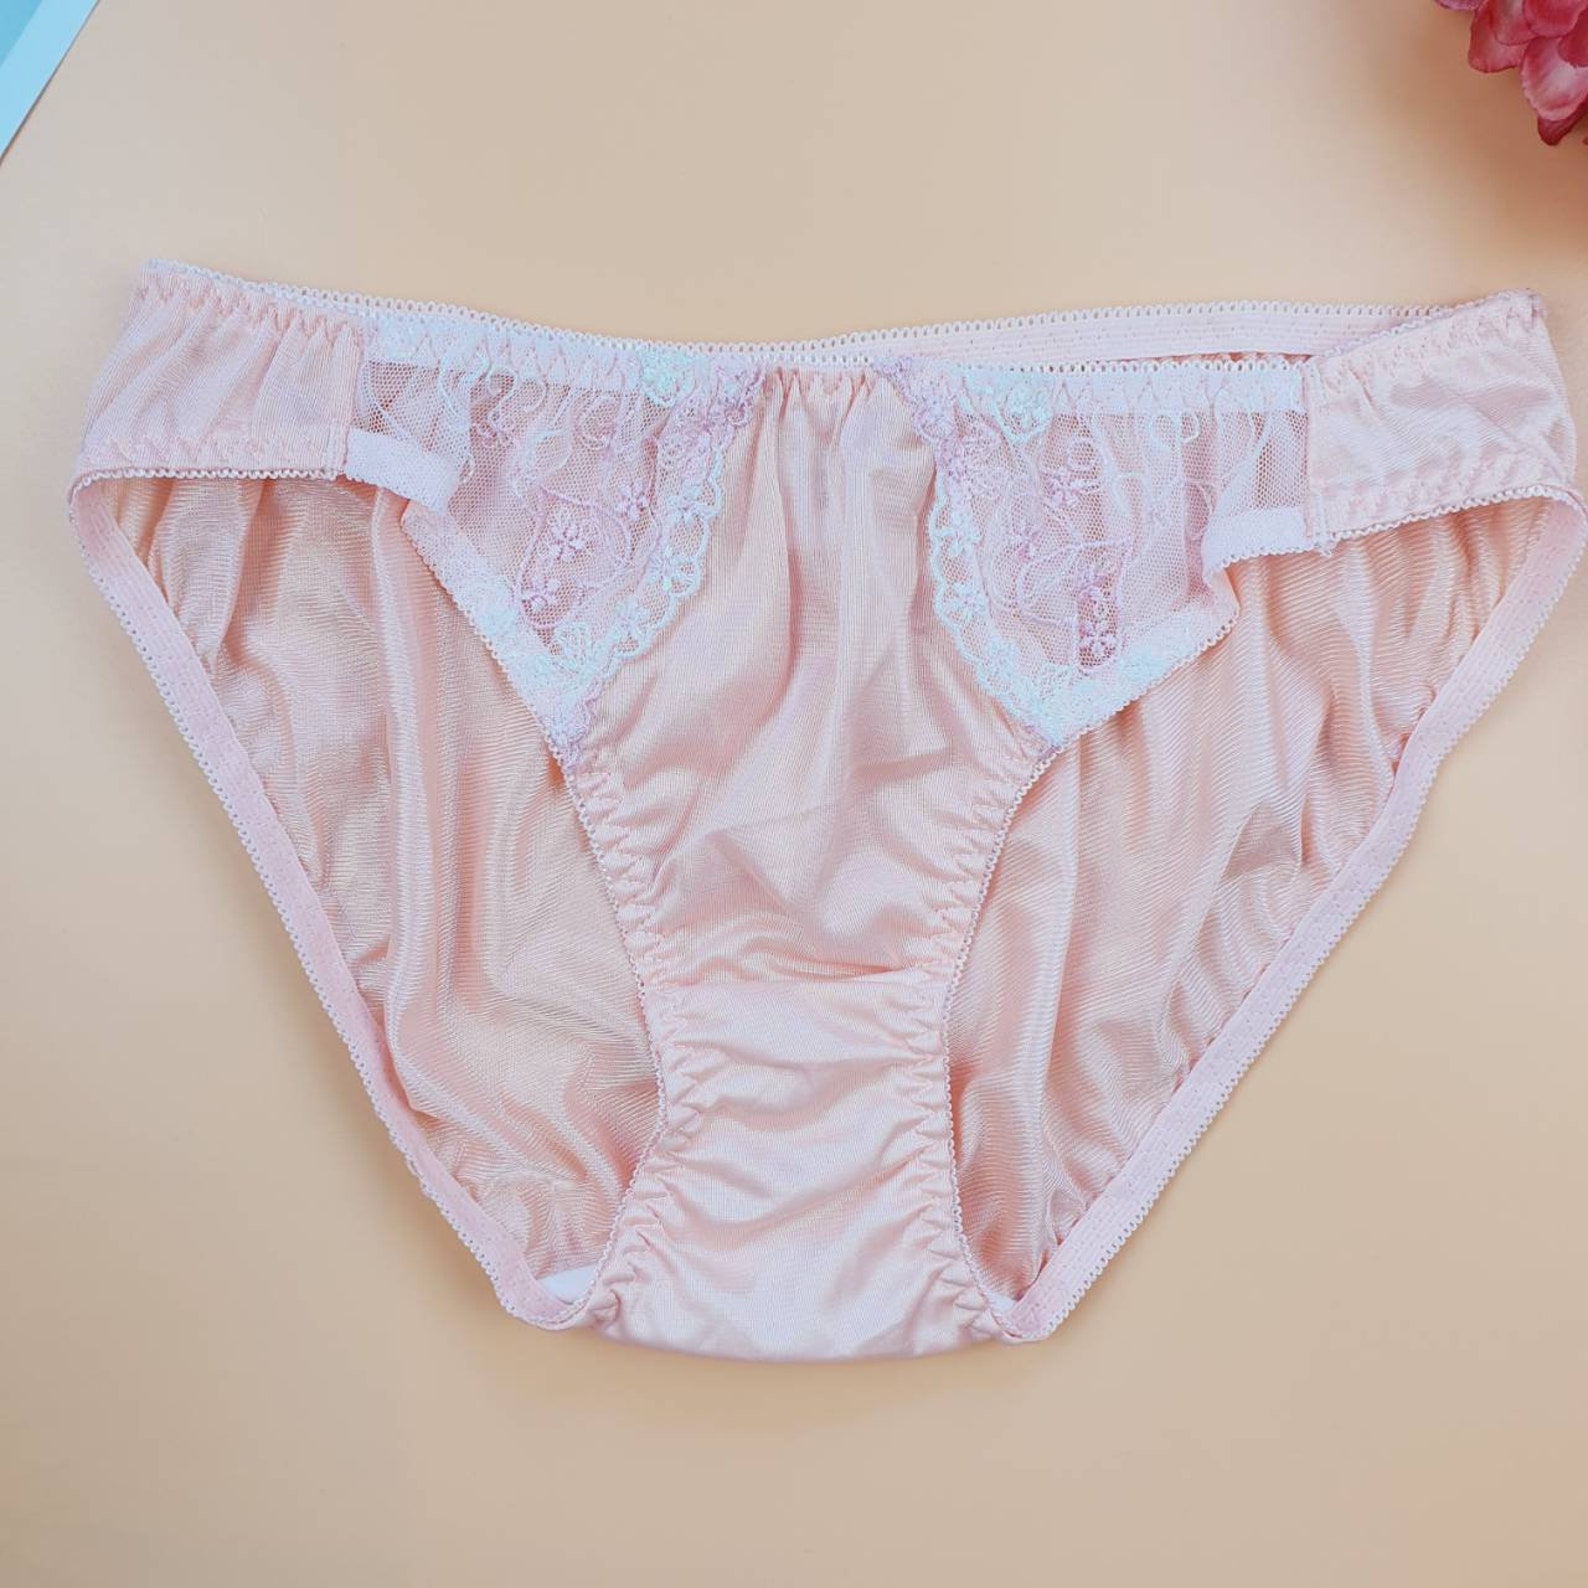 M Lovely Peach colorpanty | Etsy